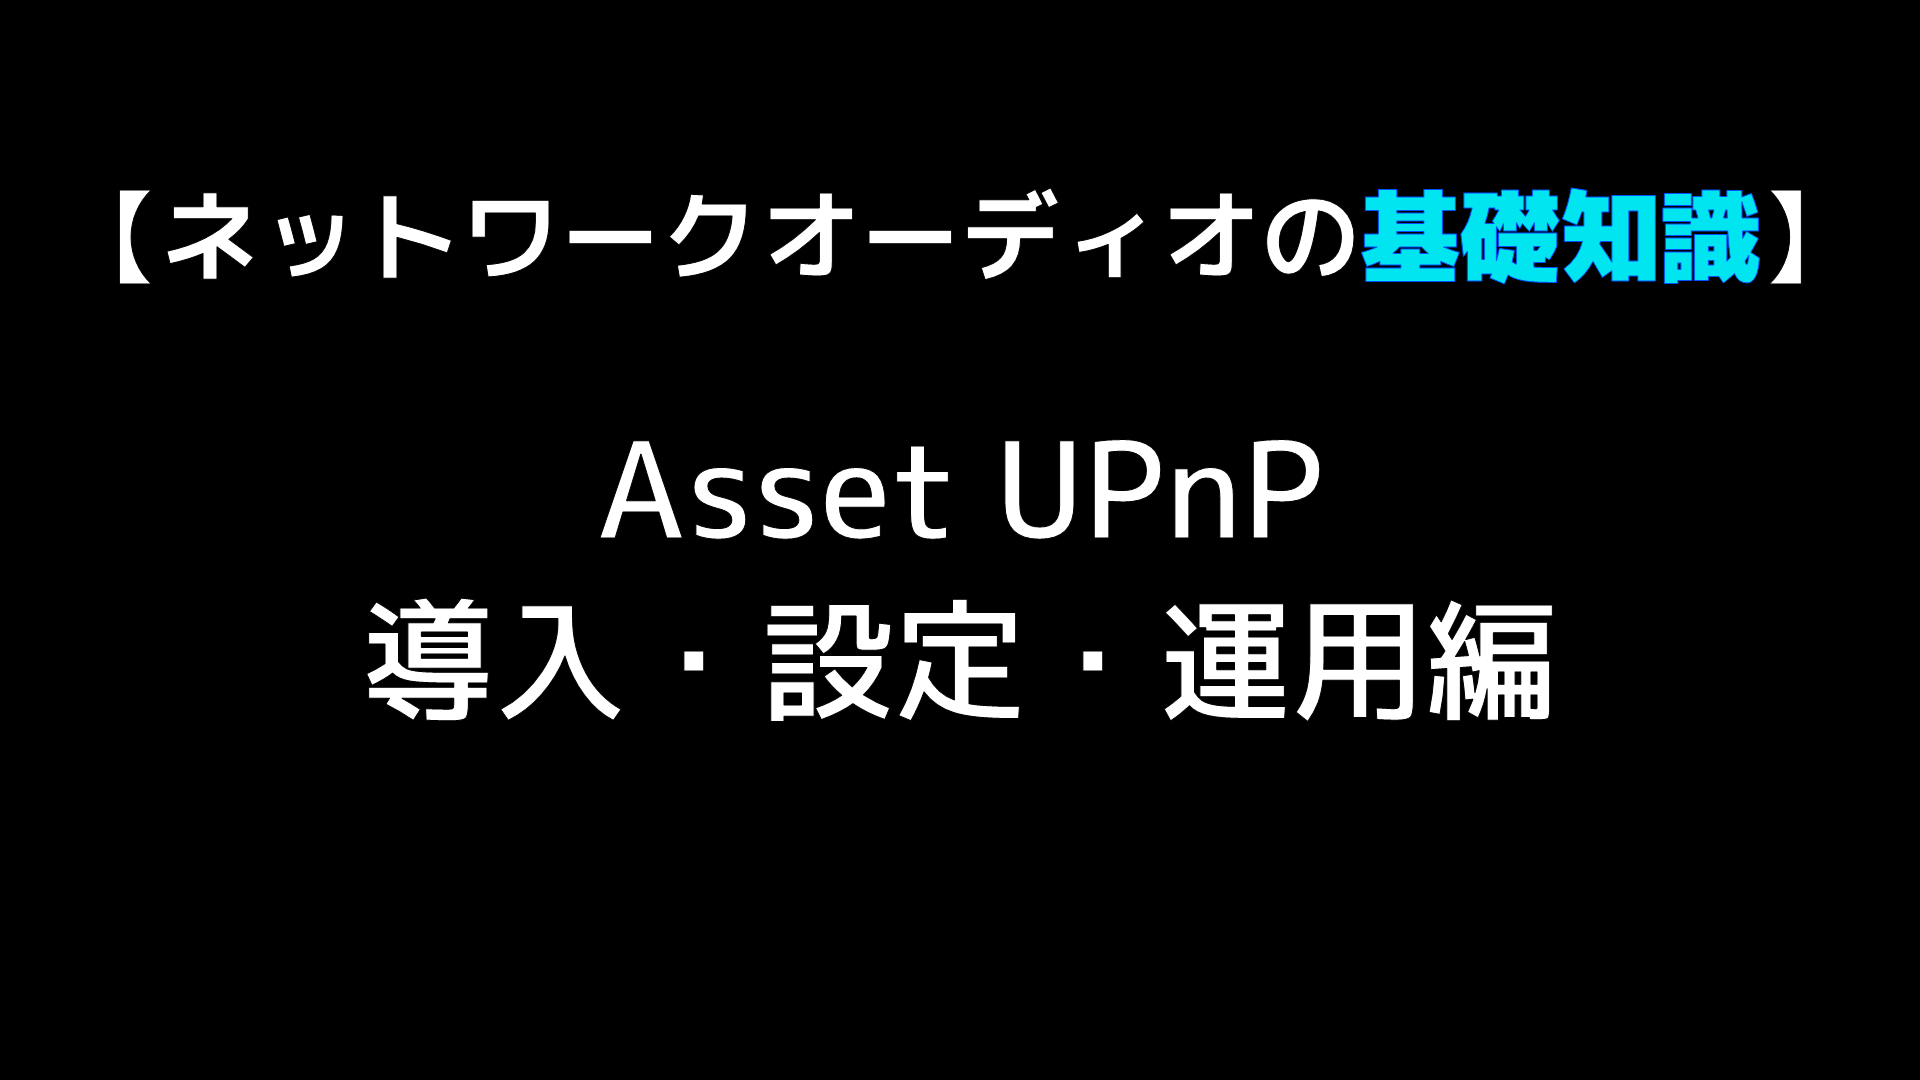 asset upnp large music collections